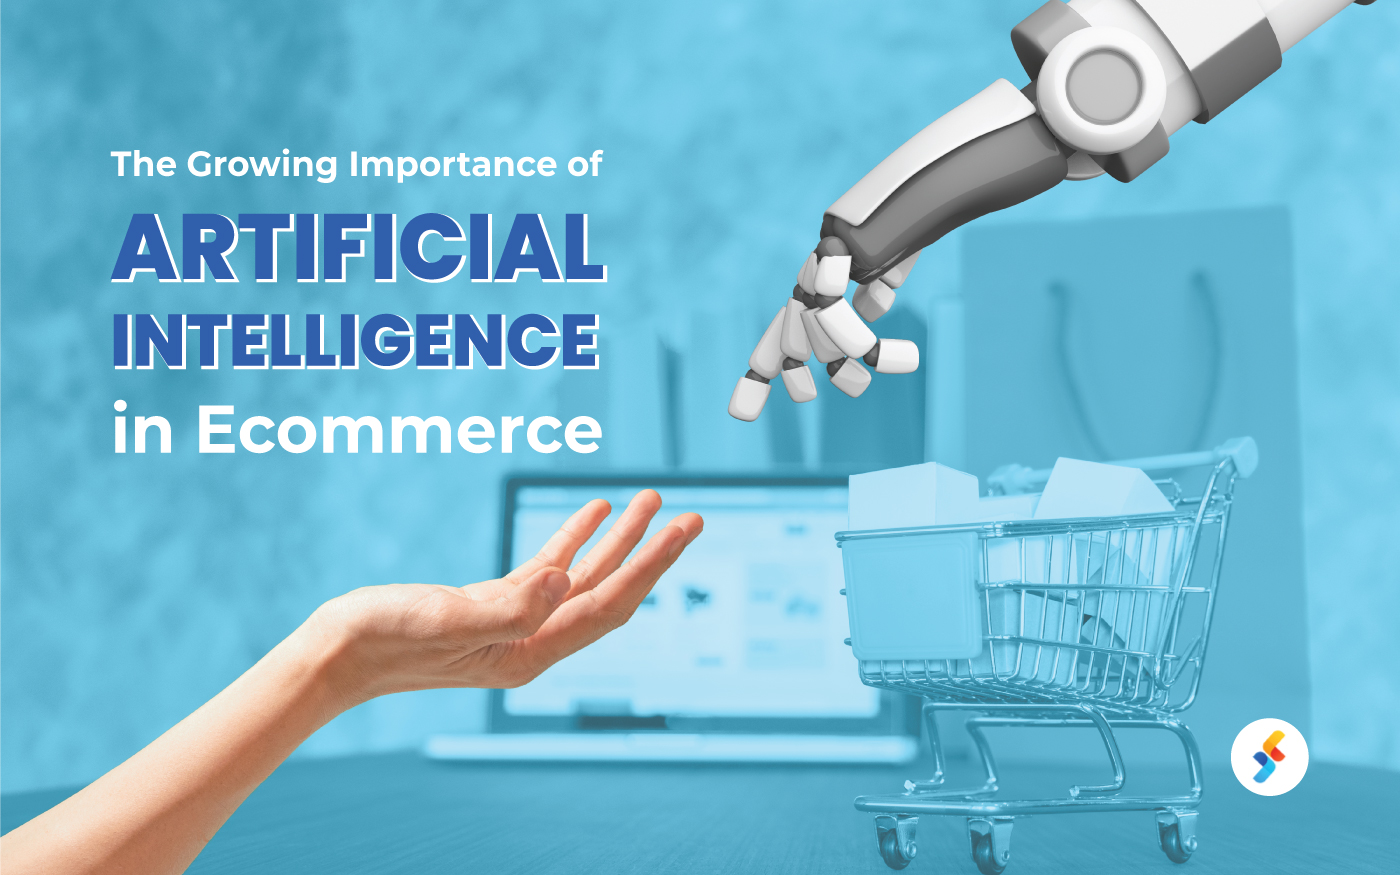 The Growing Importance of Artificial Intelligence in eCommerce